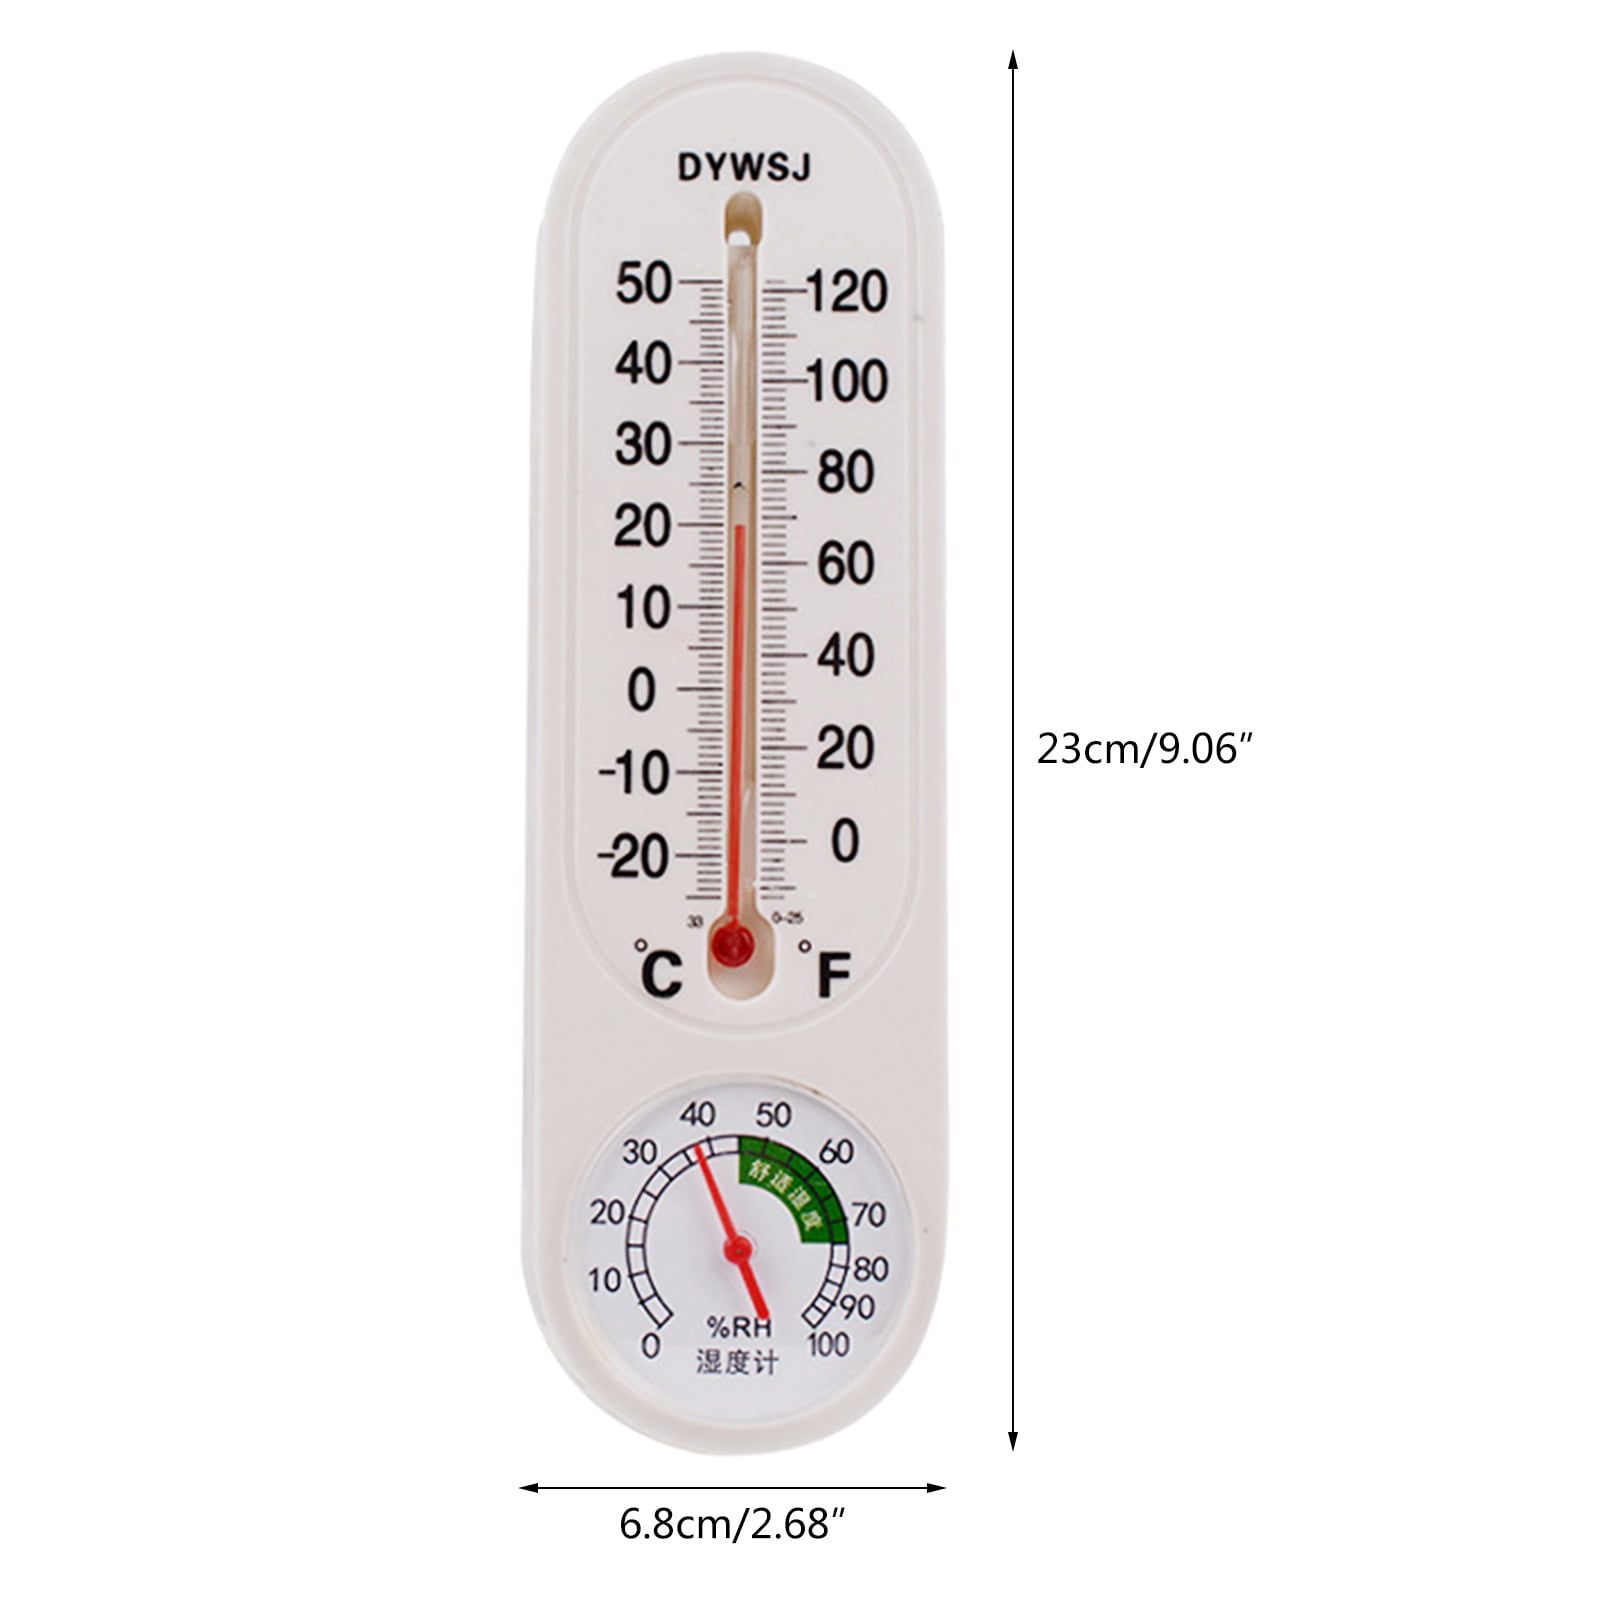 Pokerty9 Room Thermometer, High Accuracy Indoor Temperature Gauge